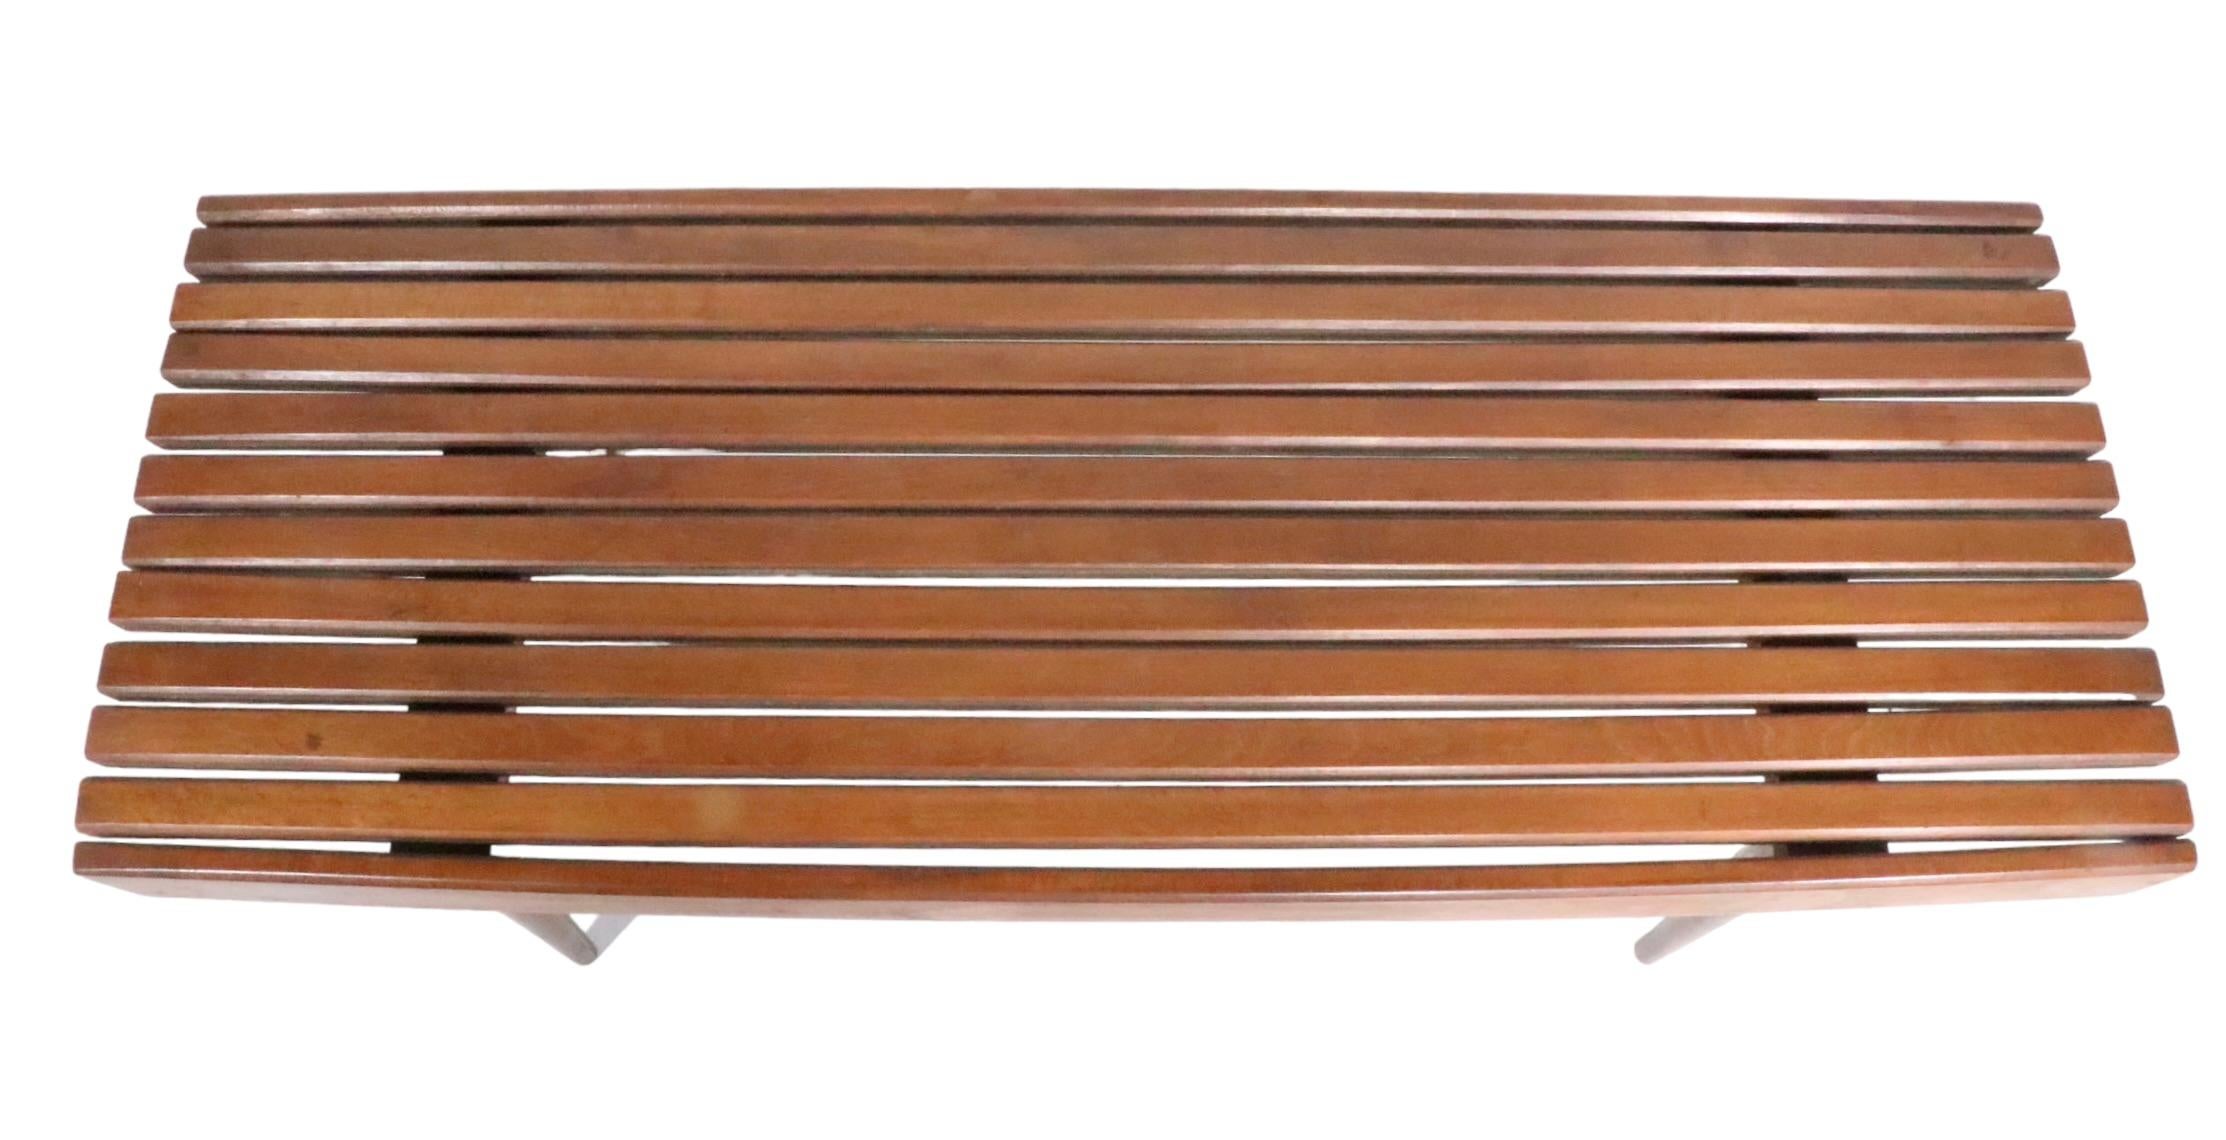 Mid Century Slat Bench Coffee Table Made in Yugoslavia C 1950s For Sale 4